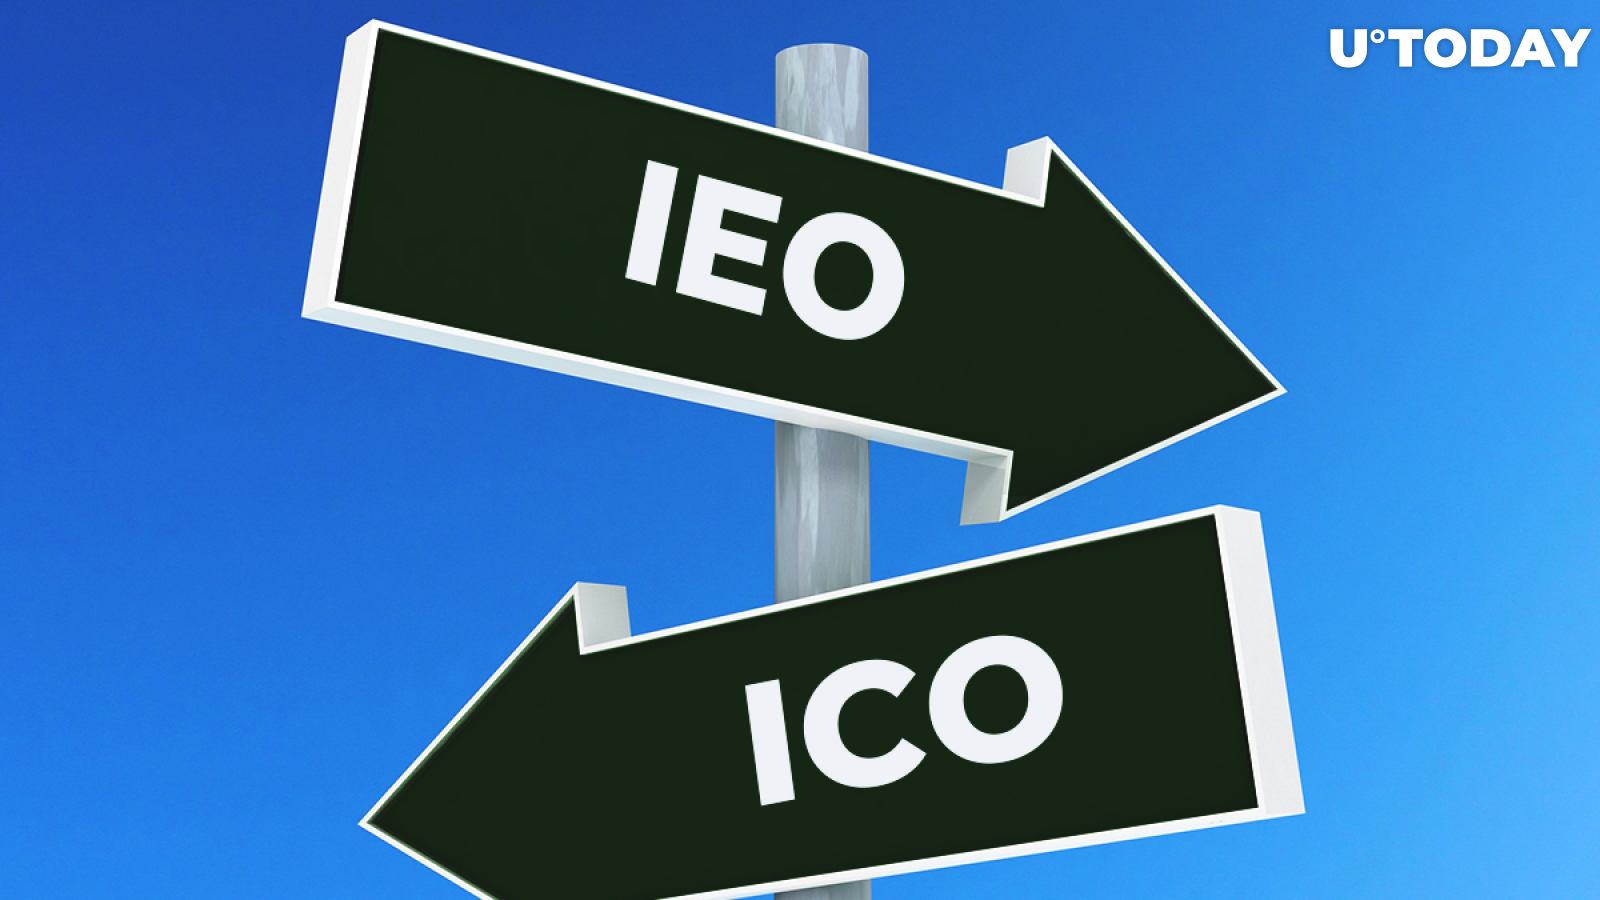 IEOs vs ICOs: What Are the Differences?